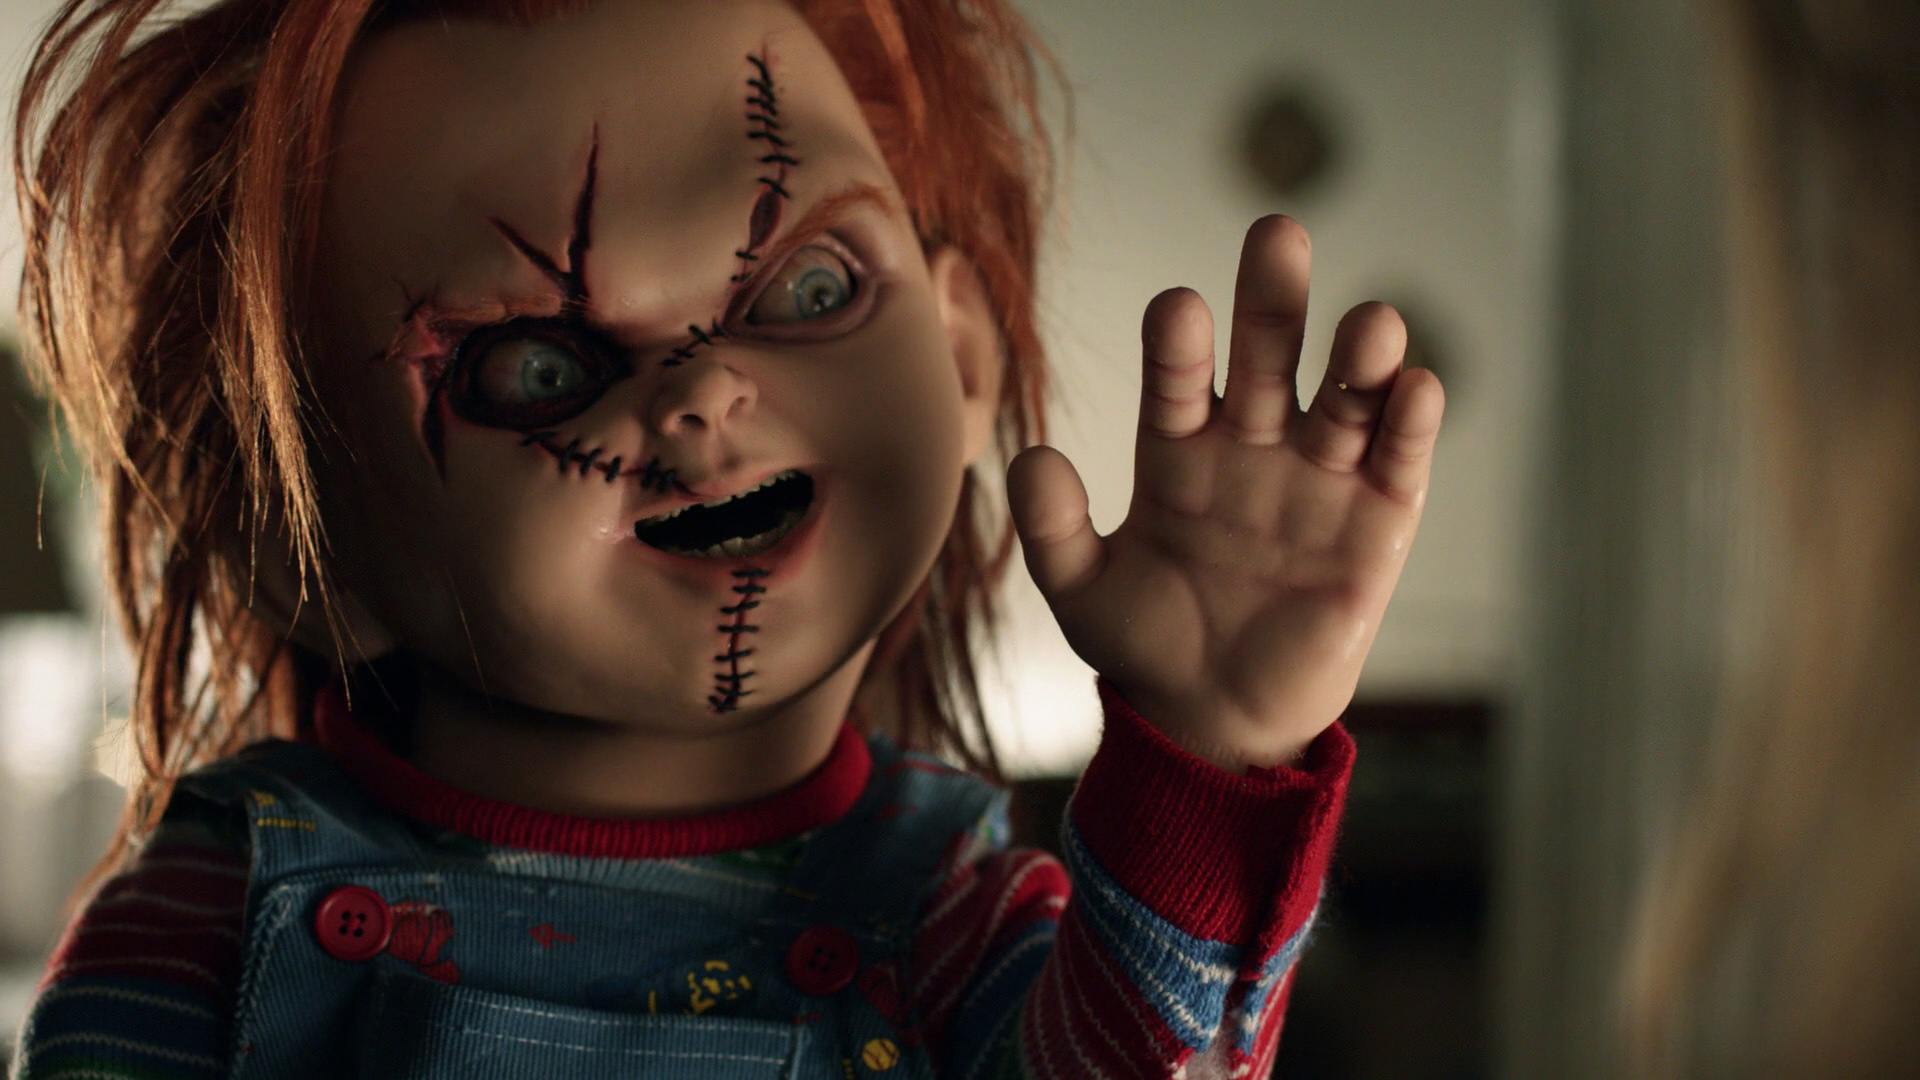 Chucky Hd Movie Wallpapers